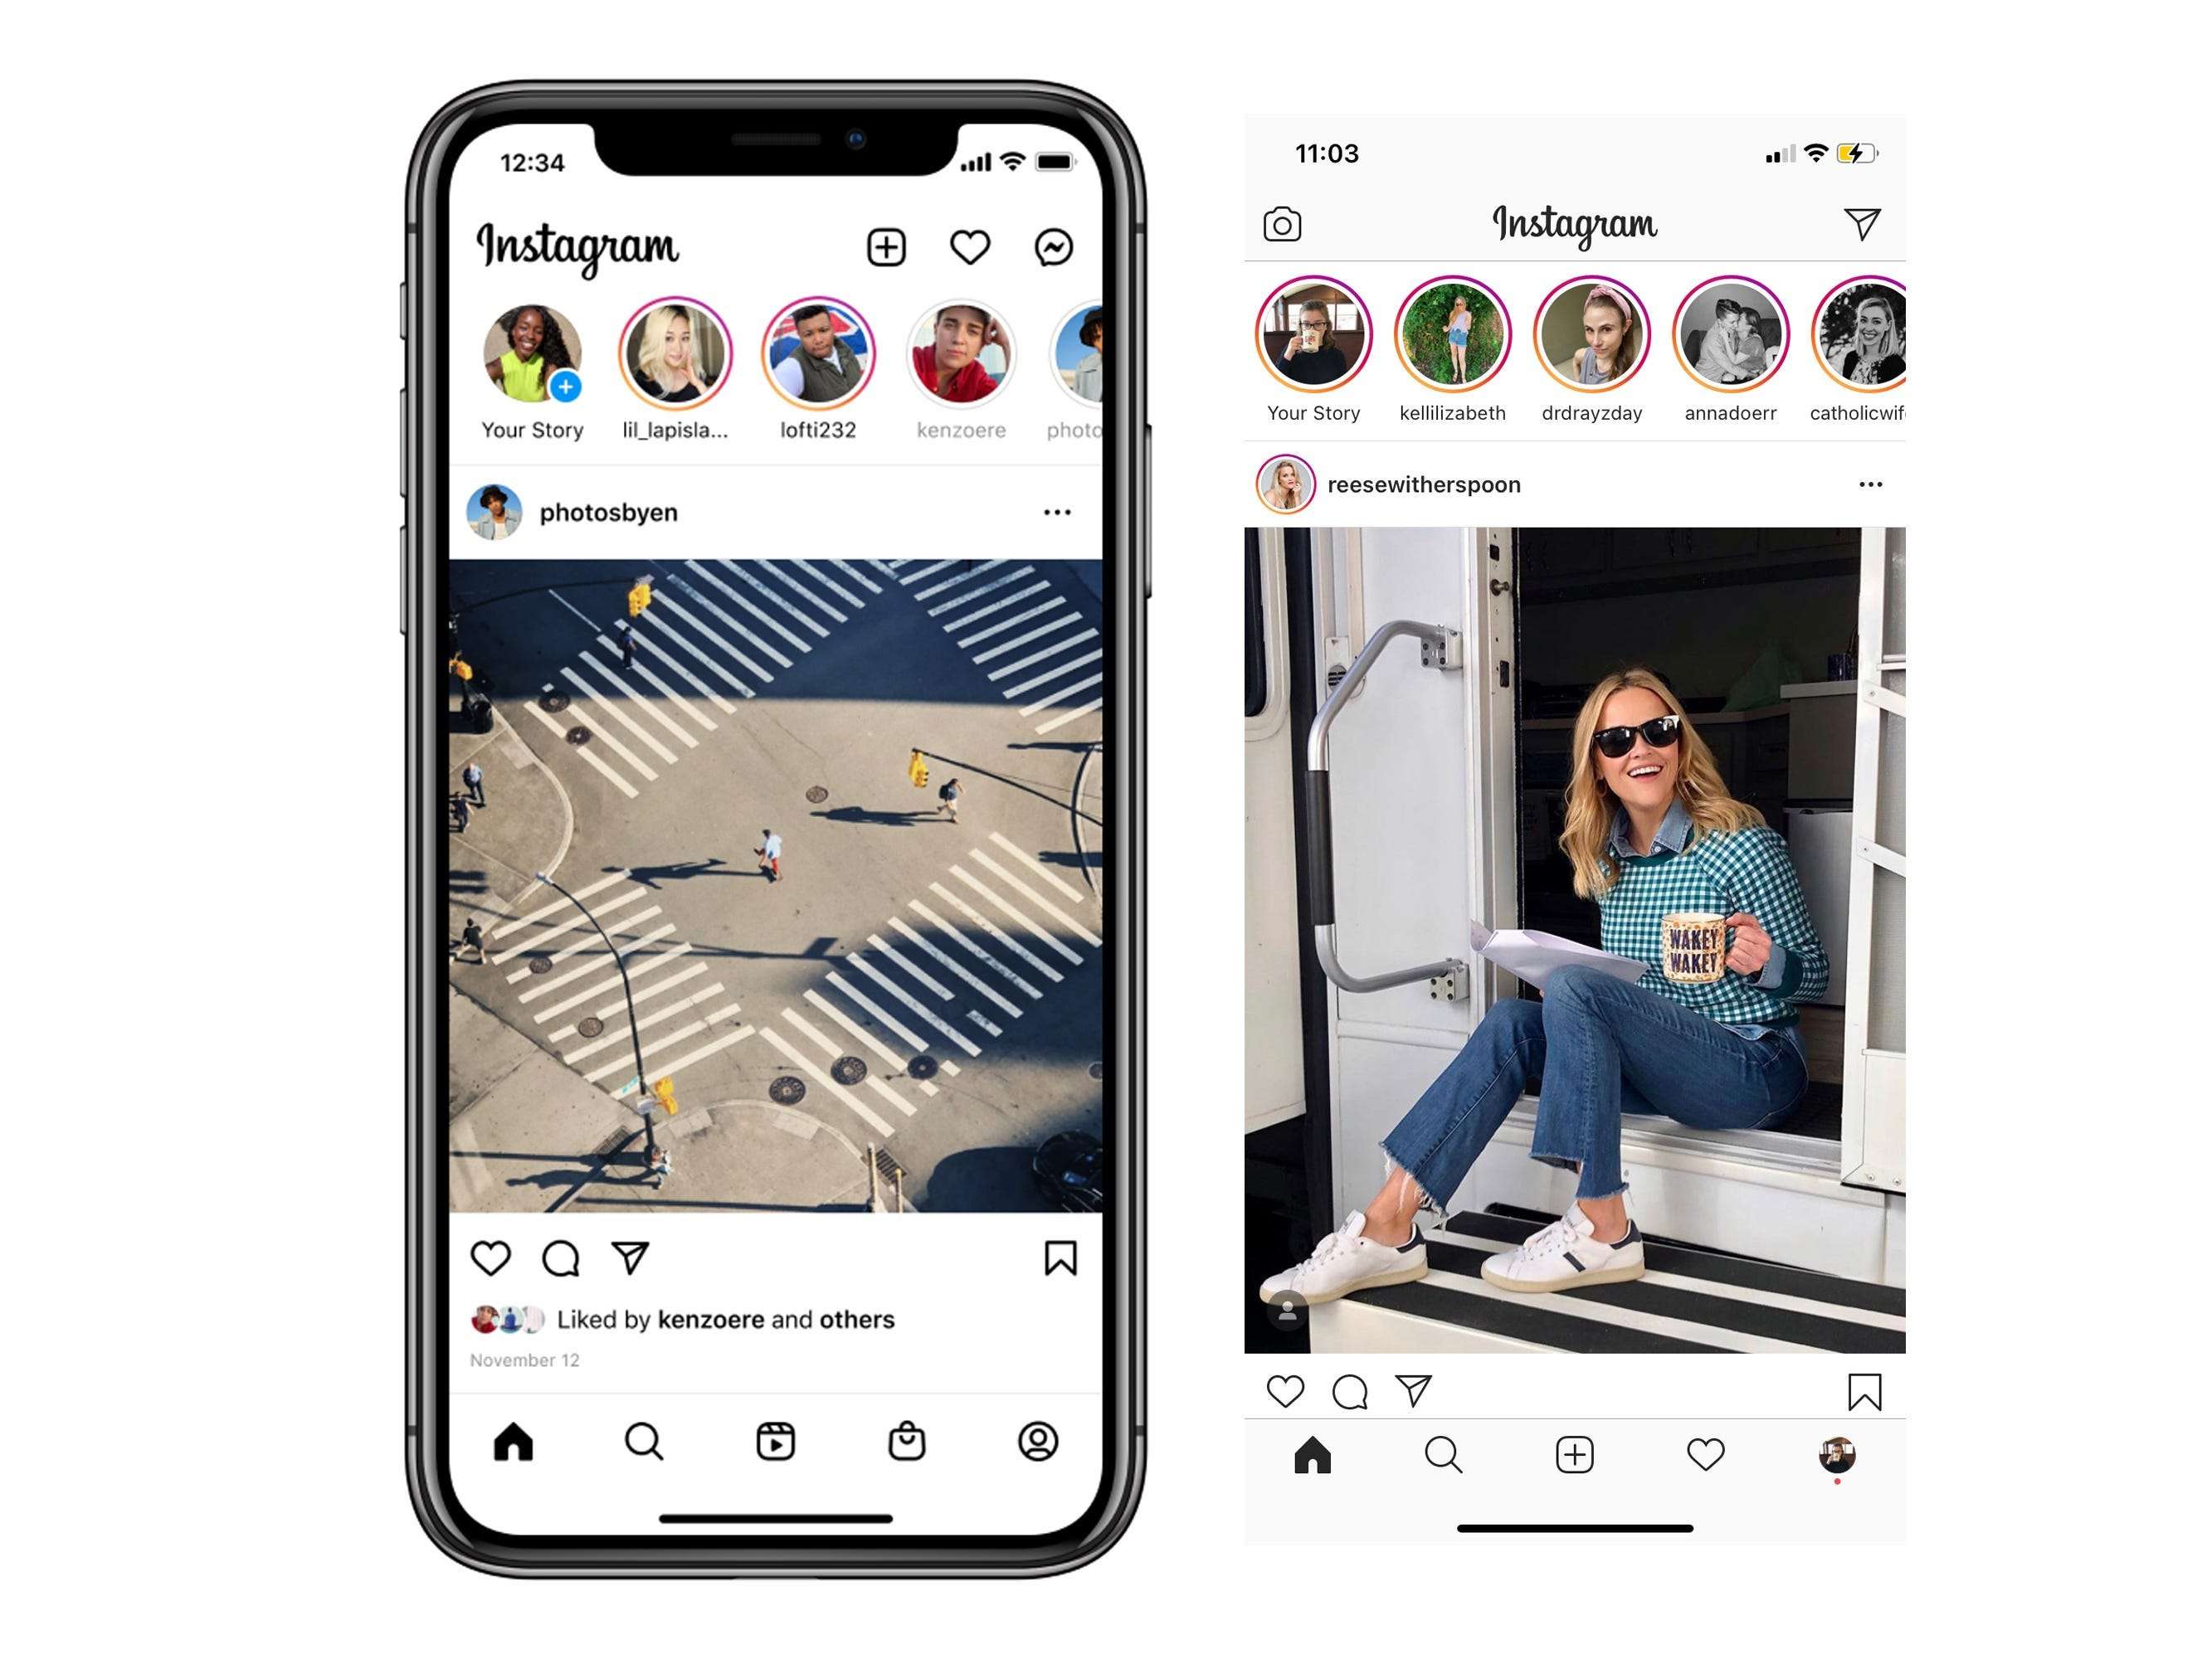 Instagram is redesigning the home screen with prime spots for TikTok